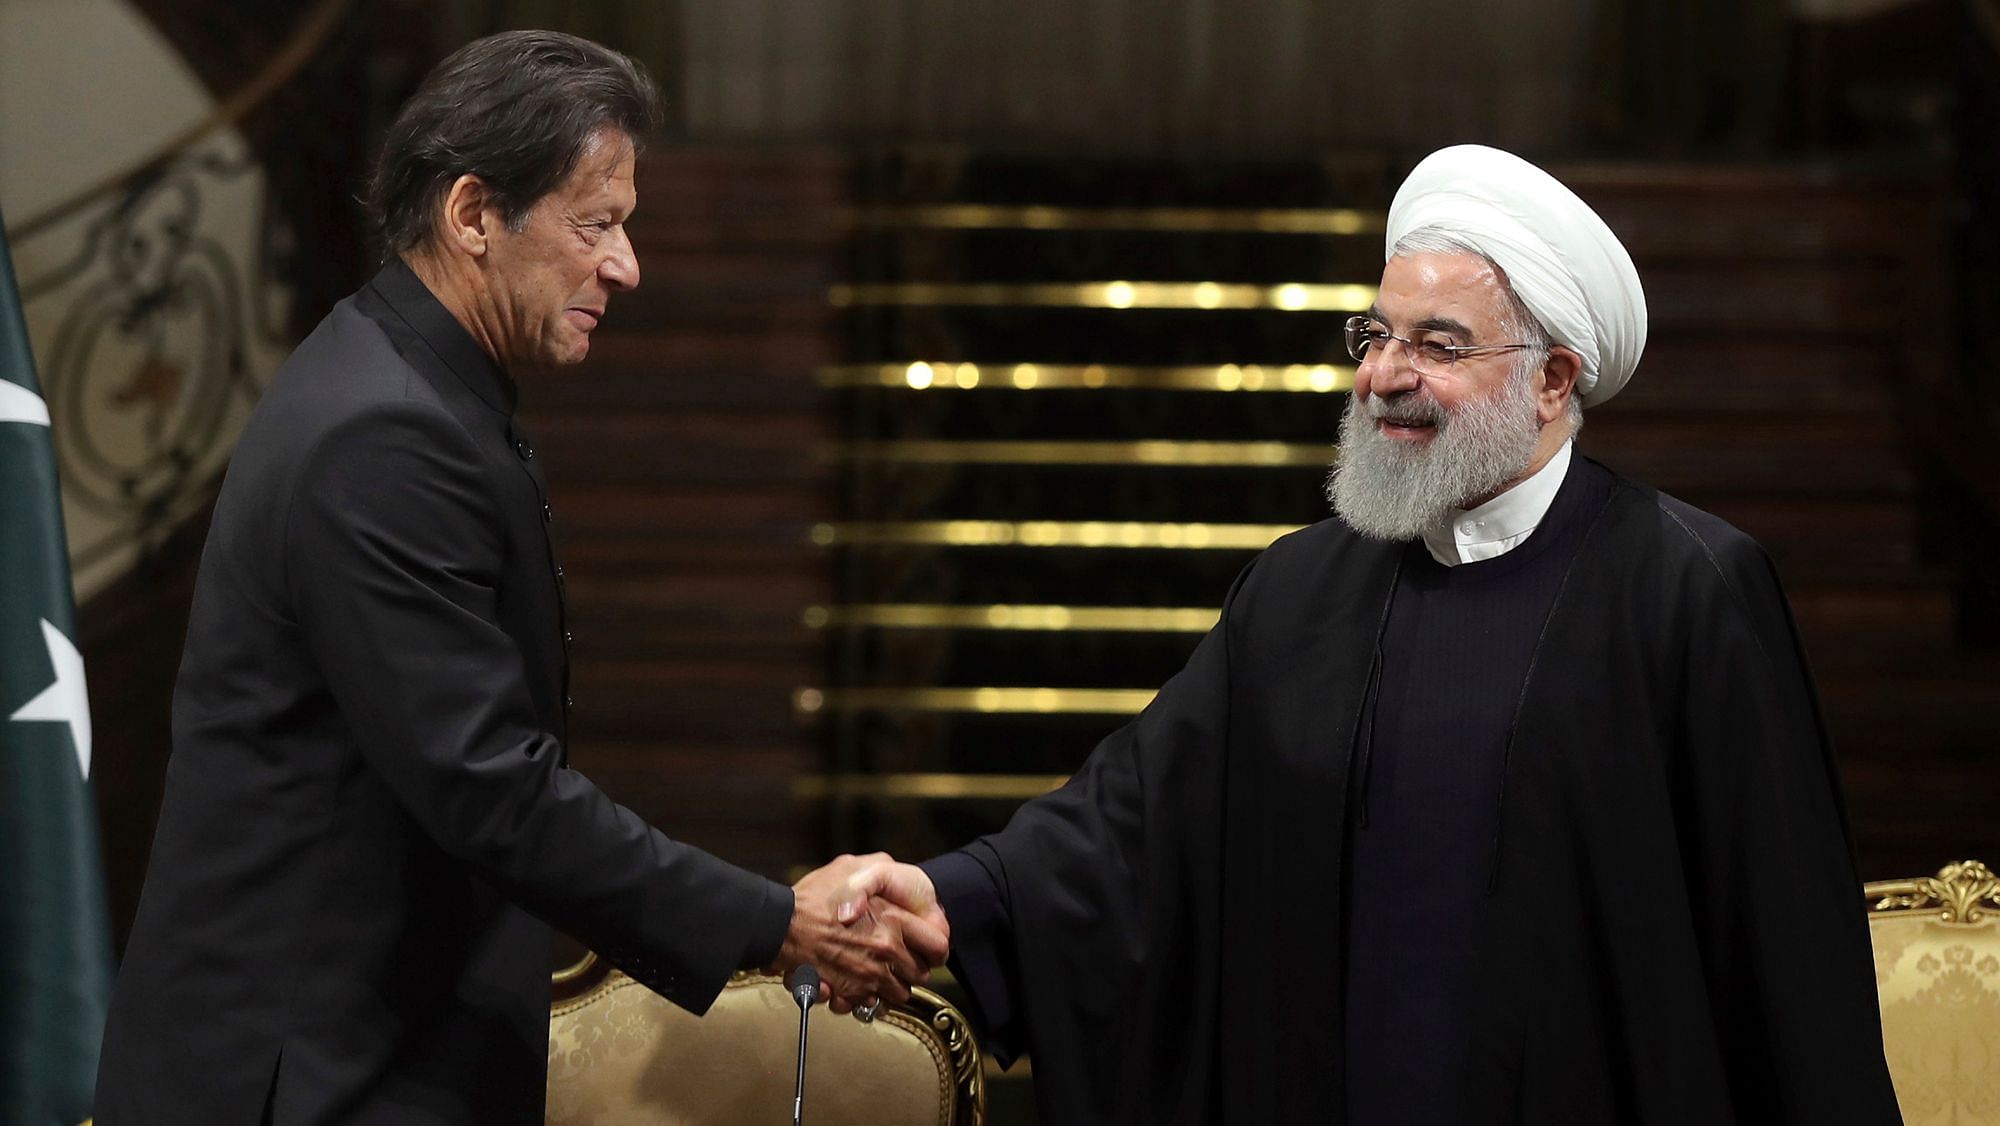 Iran’s President Hassan Rouhani and Pakistani Prime Minister Imran Khan, shake hands after a joint press briefing at the Saadabad Palace in Tehran.